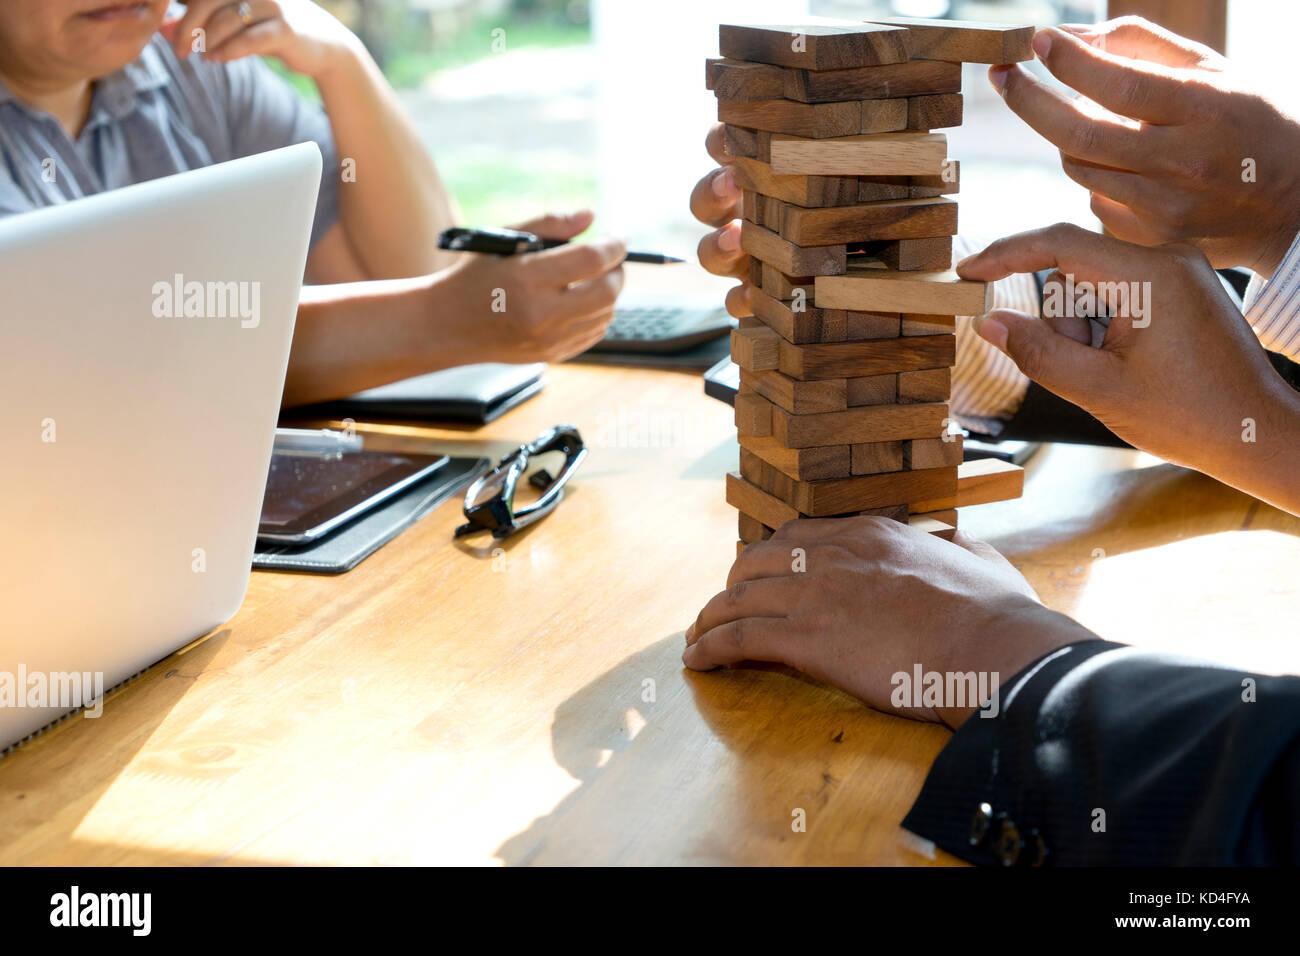 man and woman play wood material toy block for develop thinking and activity Stock Photo